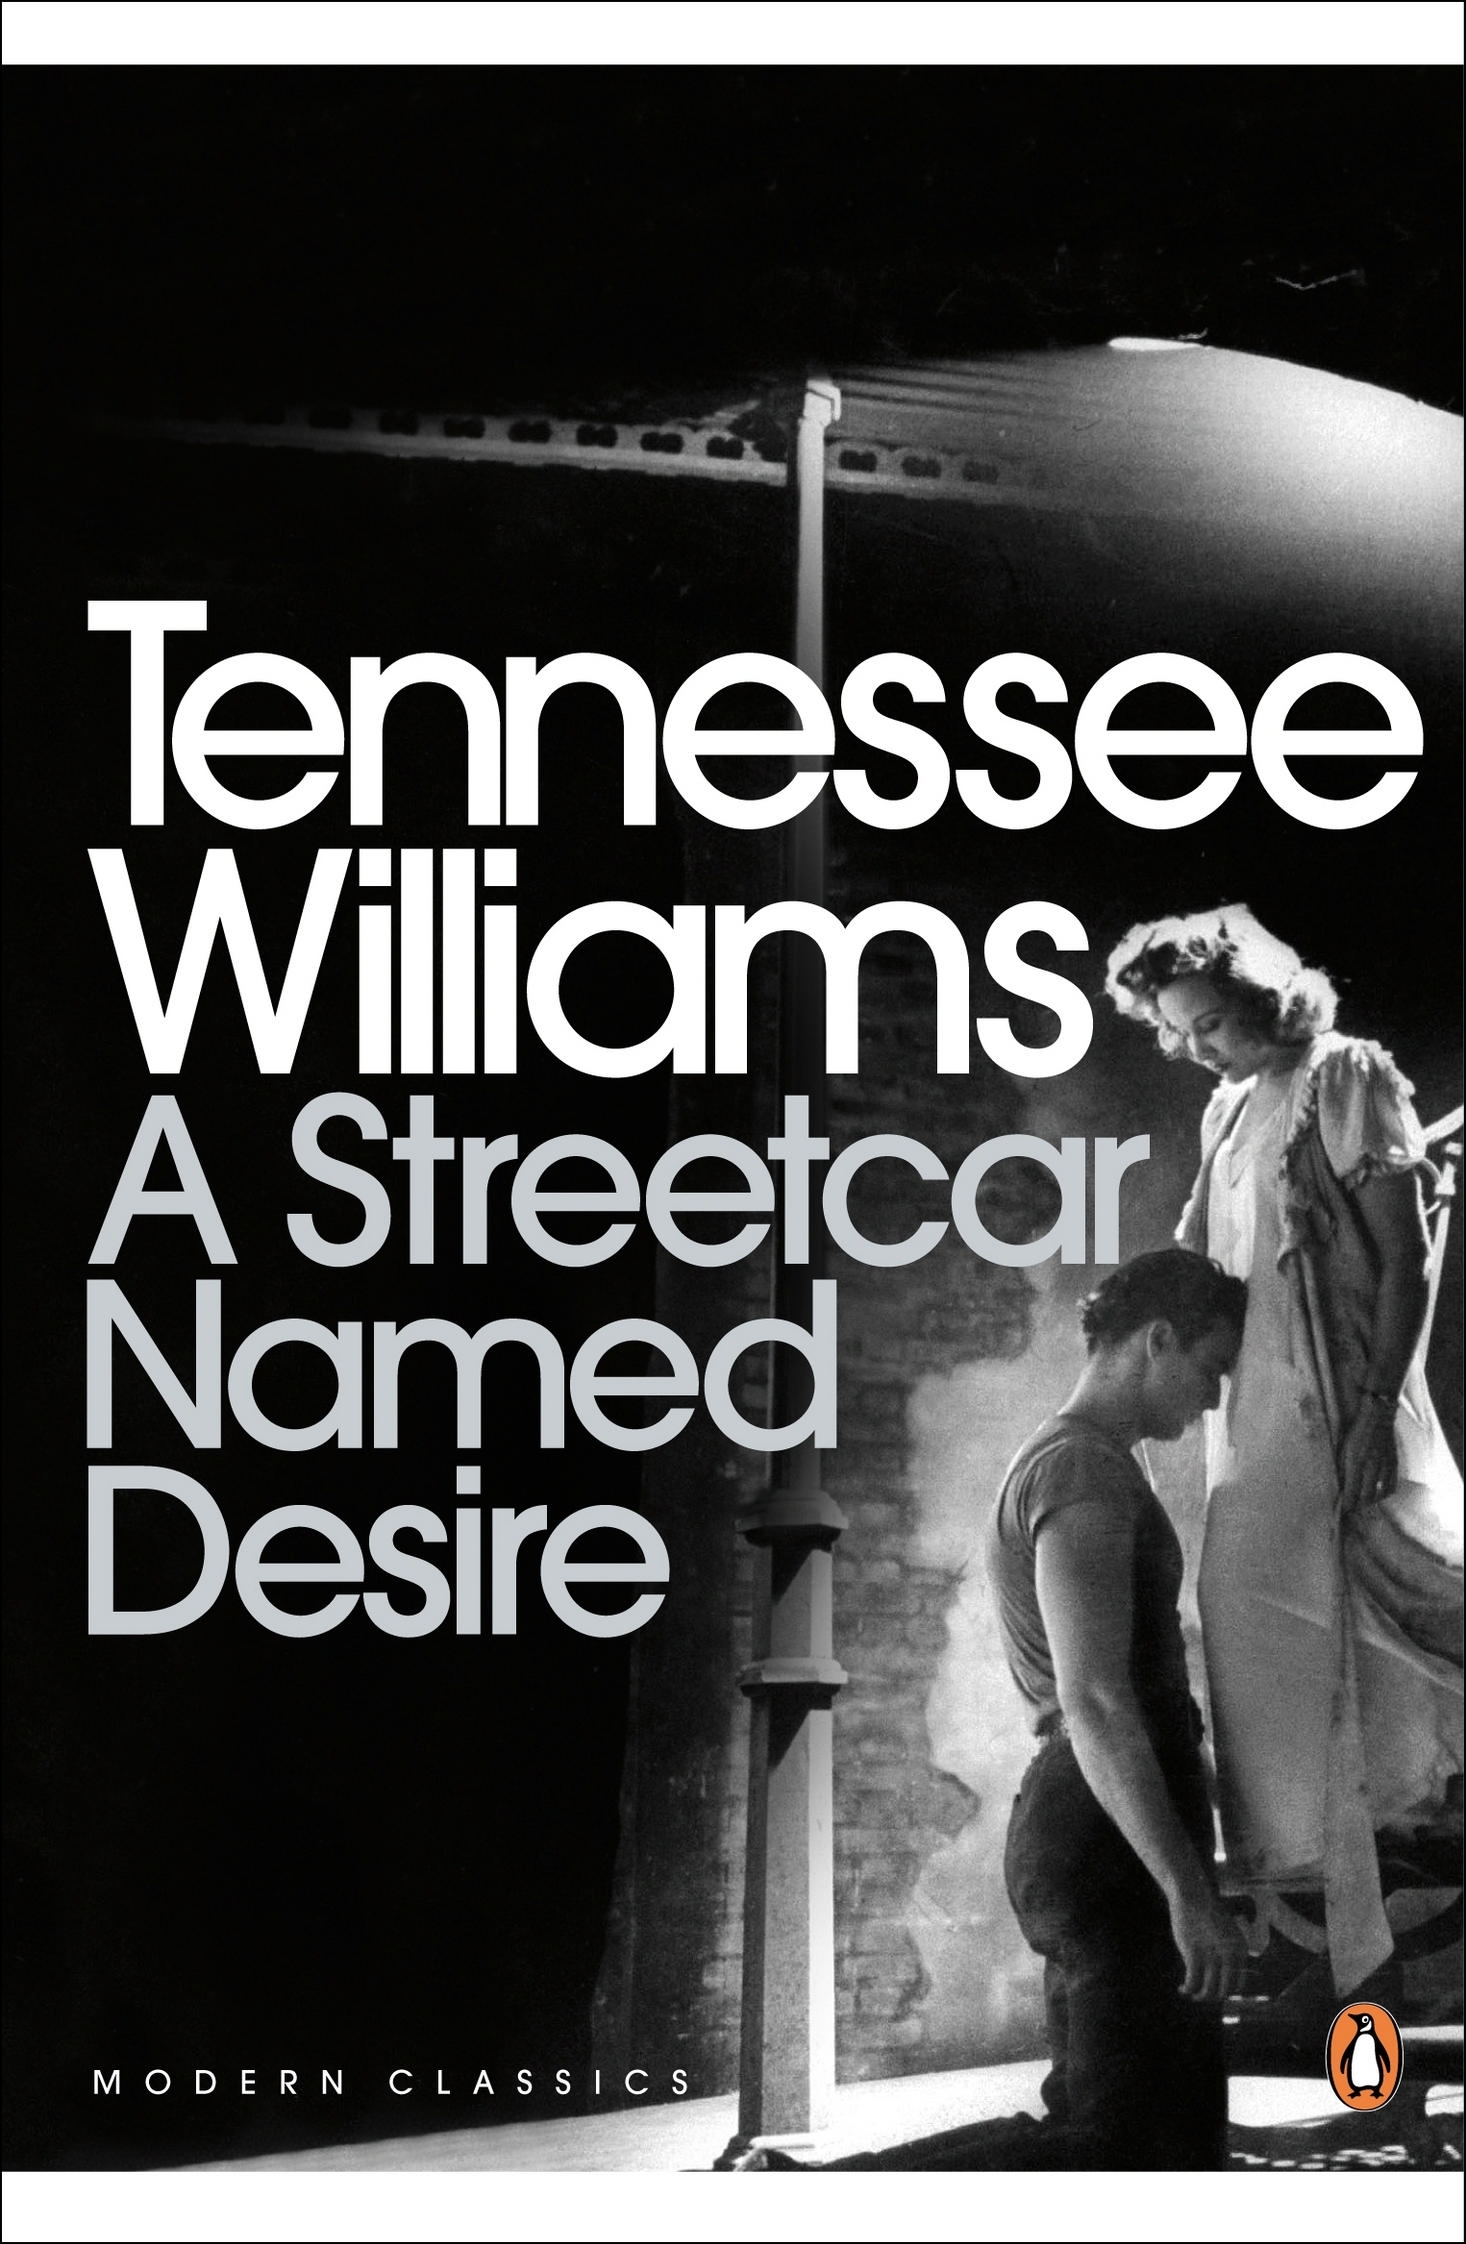 A Streetcar Named Desire By Tennessee Williams - Penguin Books Australia